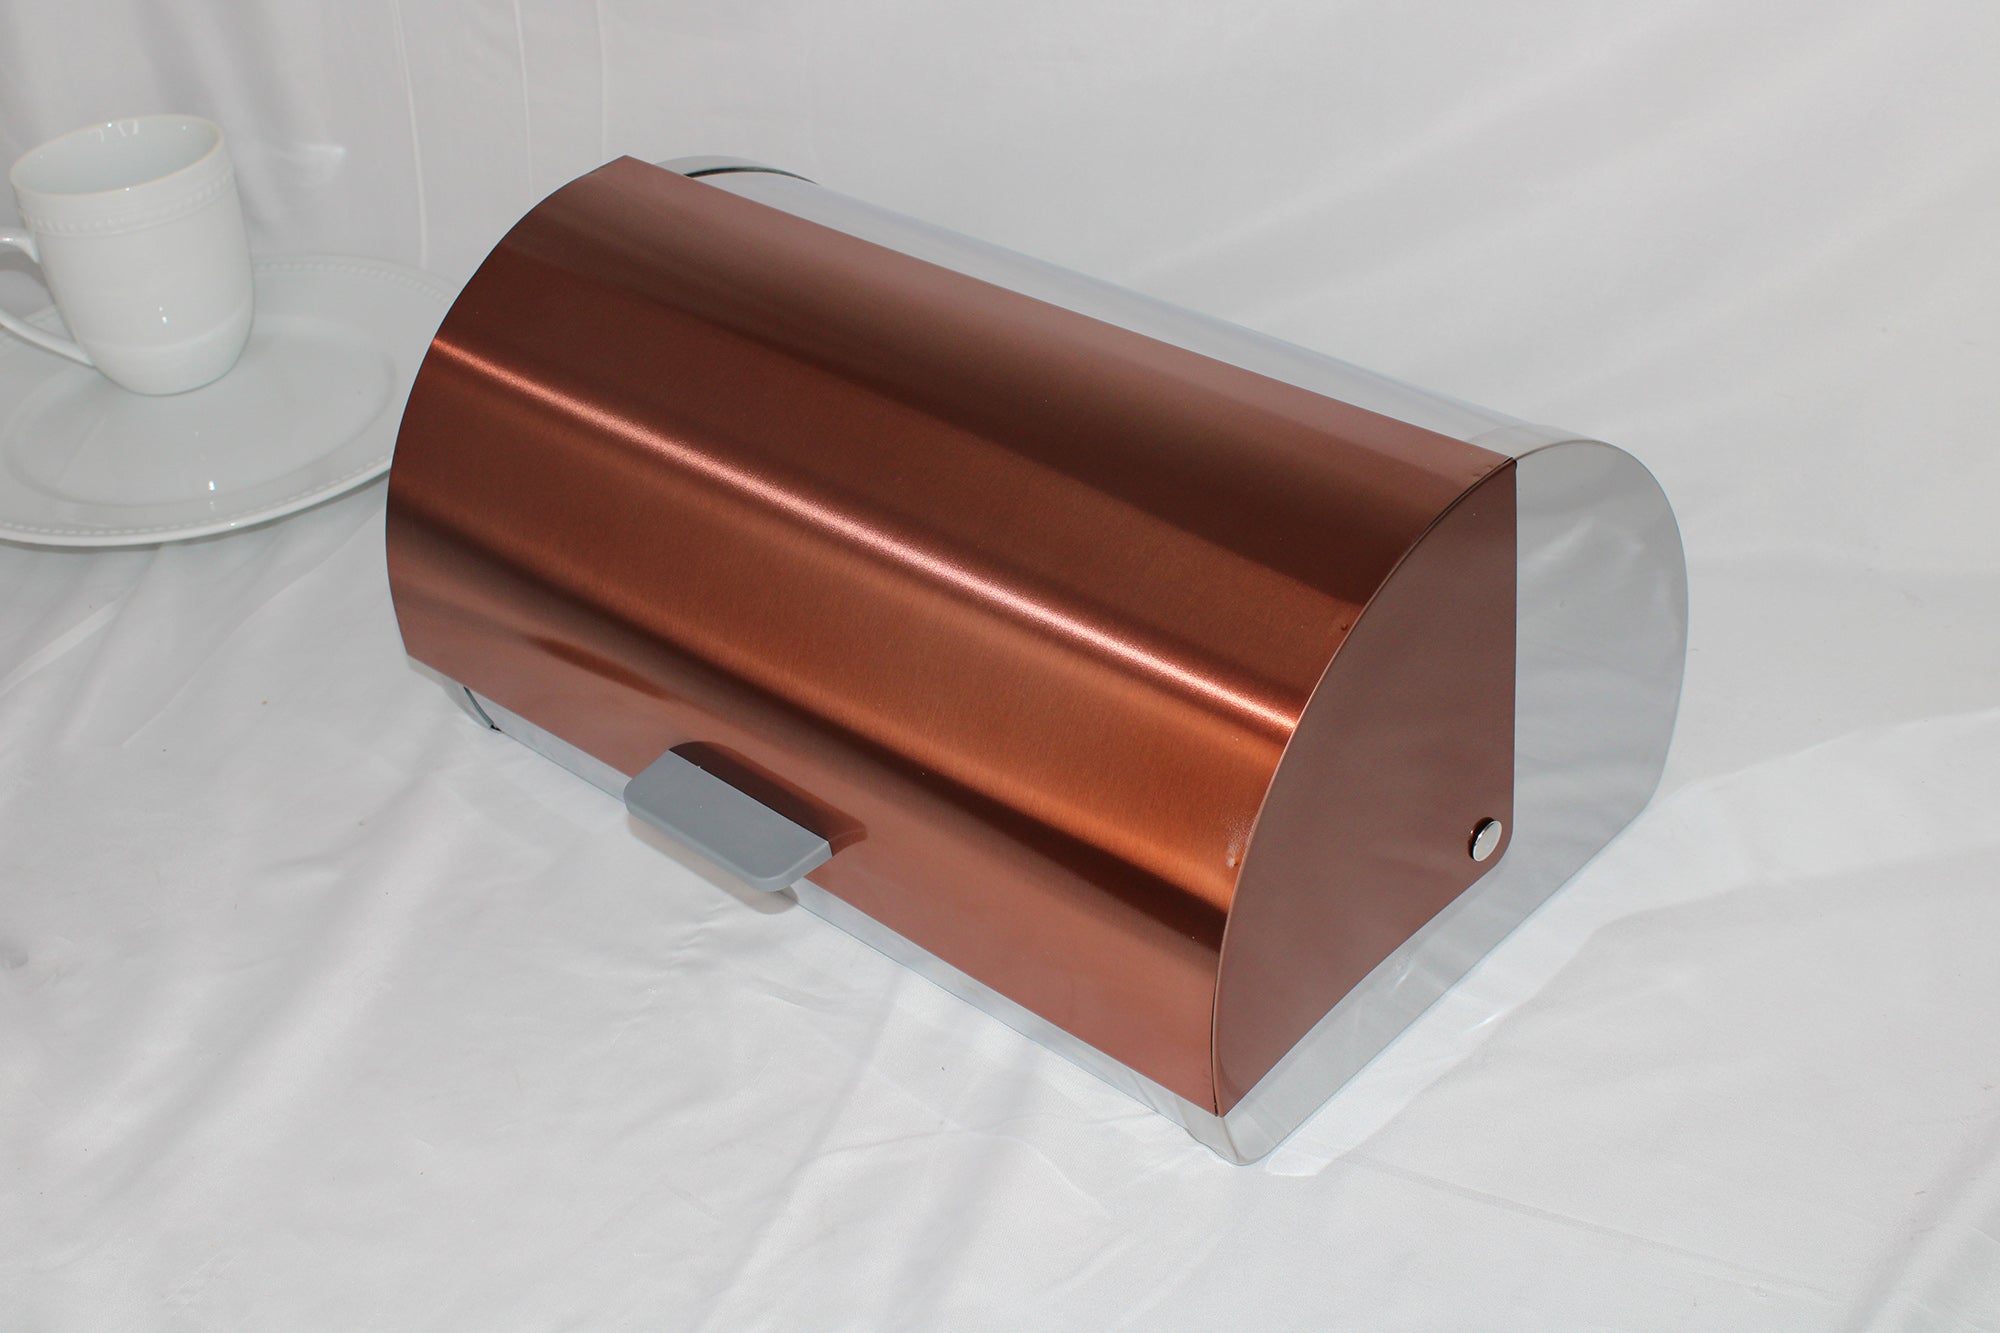 Polished Stainless Steel Bread Bins With Colored Lids